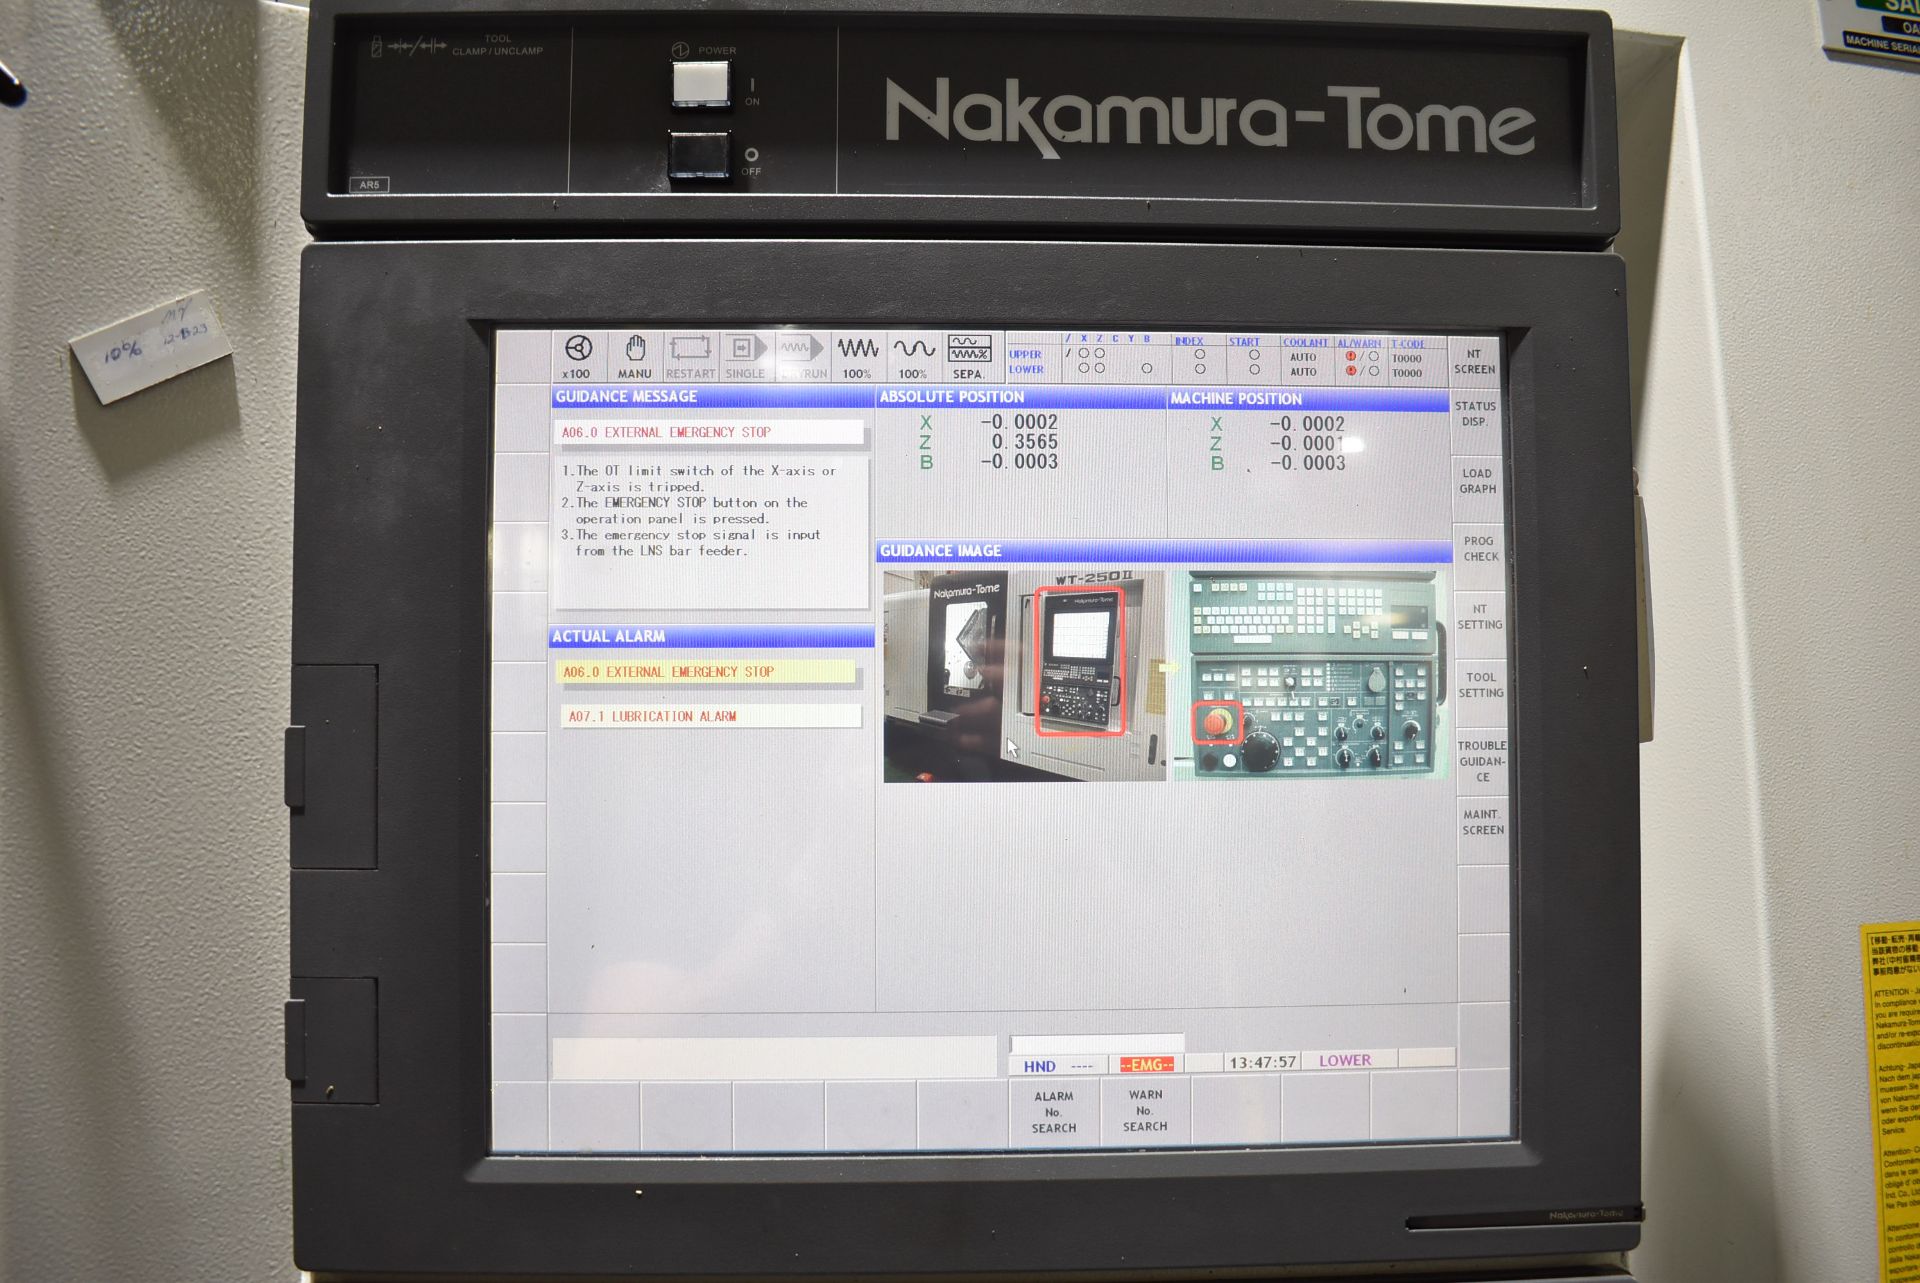 NAKAMURA-TOME (2013) WT-250 II S MULTI-AXIS OPPOSED SPINDLE AND TWIN TURRET CNC MULTI-TASKING CENTER - Image 8 of 21